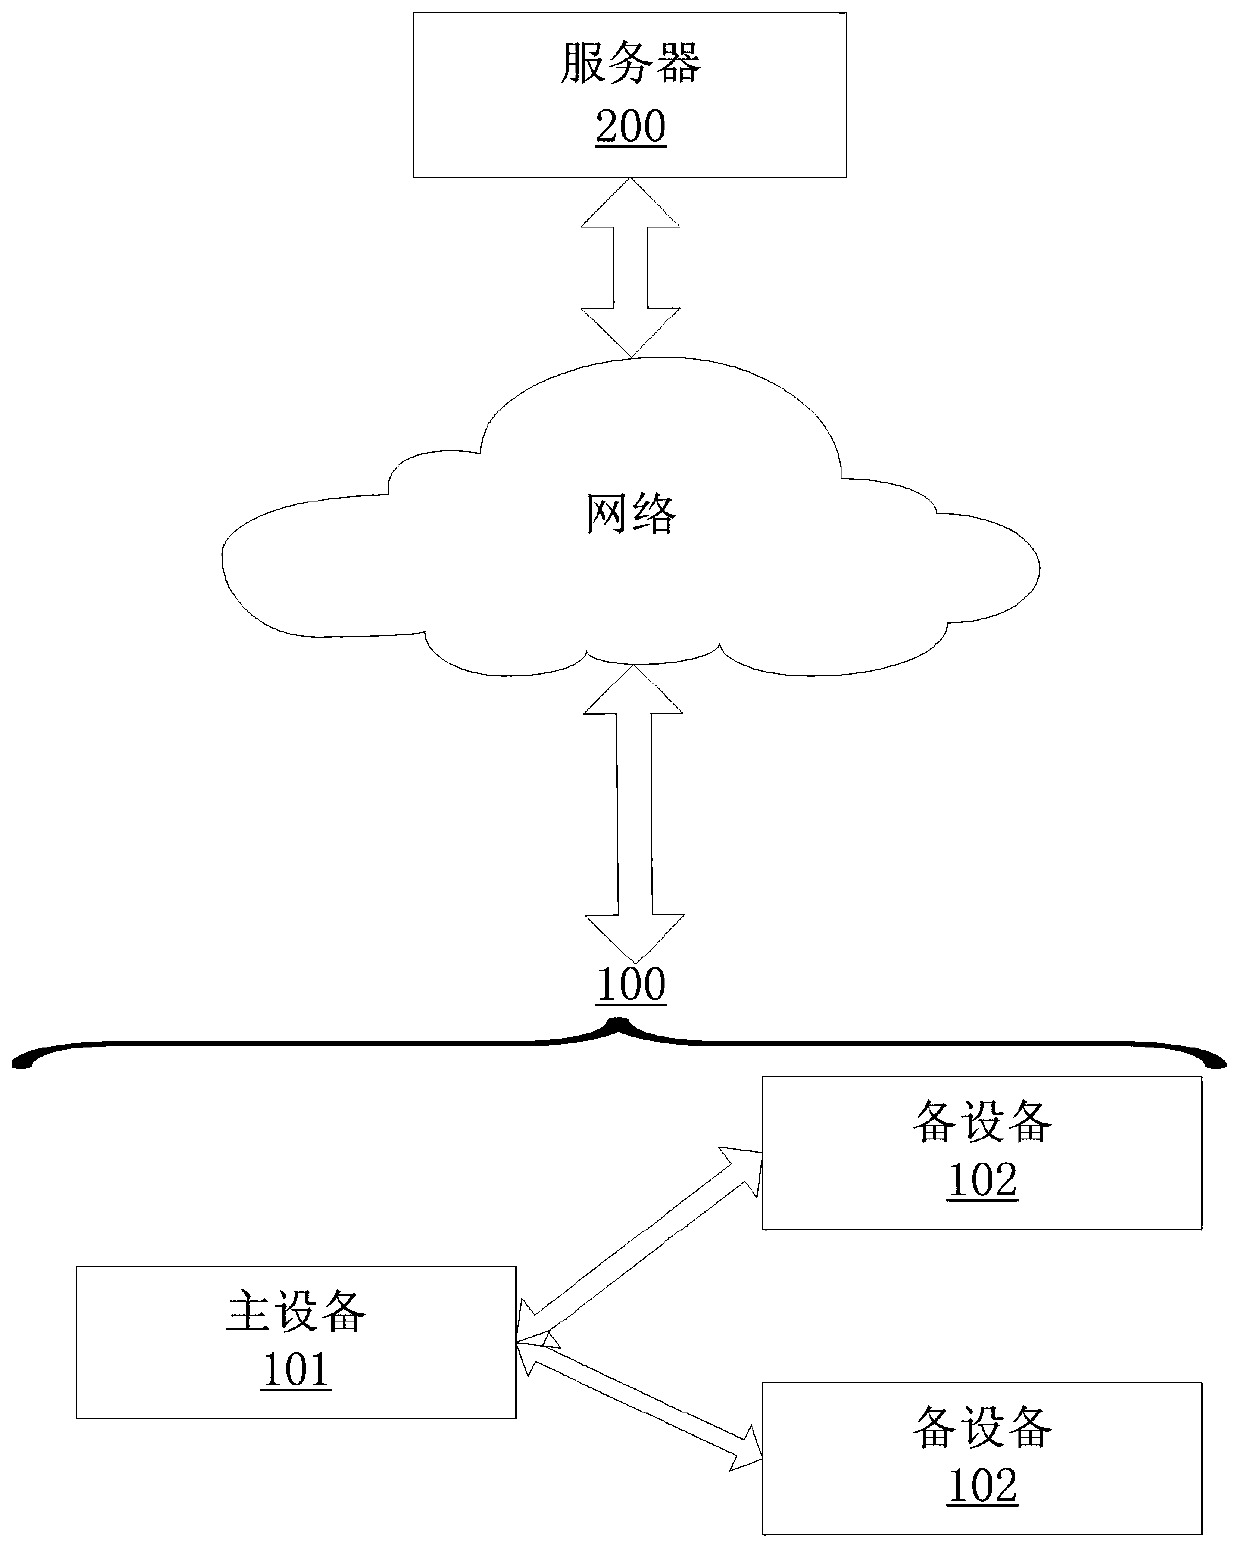 Entry management method and system